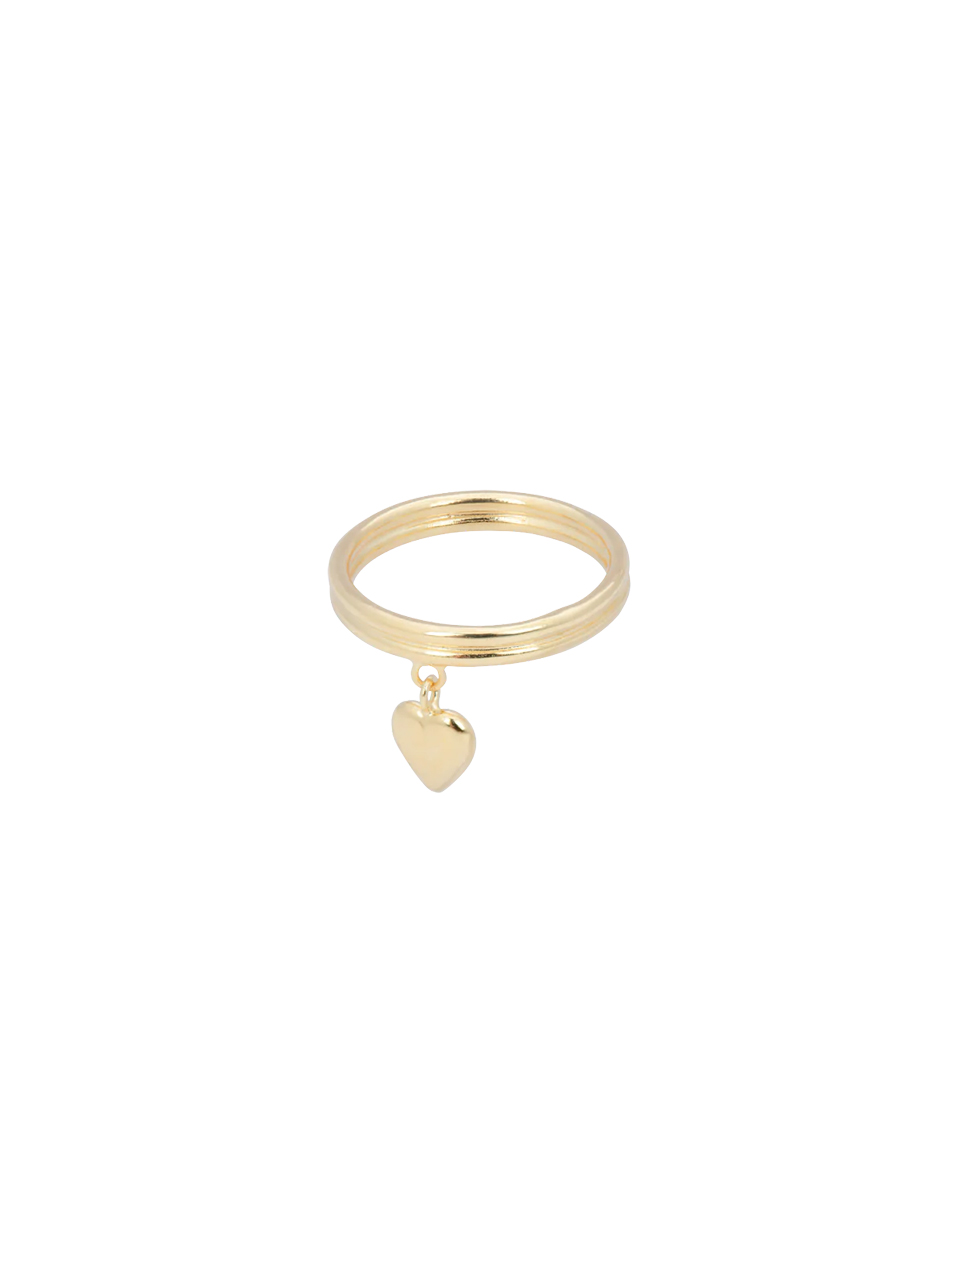 RING BRILLIANT MUSE PINKY SILVER GOLDPLATED